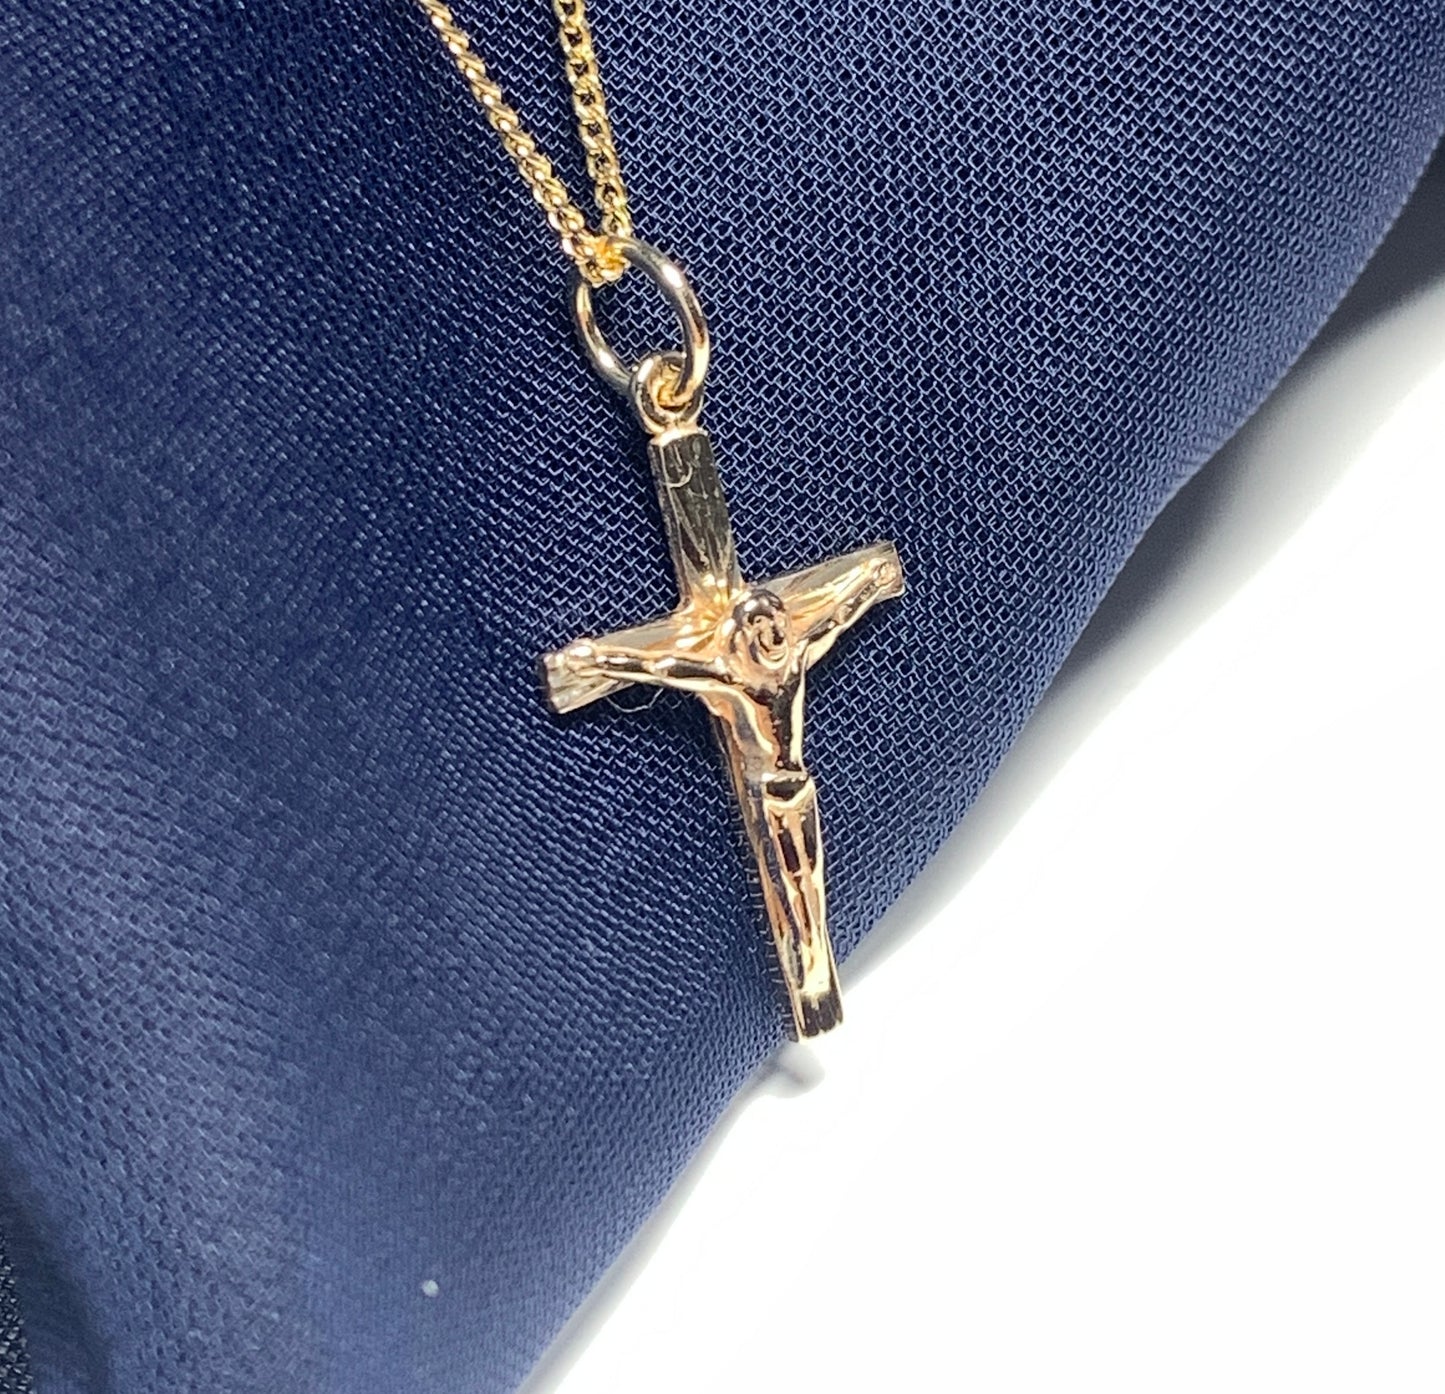 Solid yellow gold crucifix cross necklace pendant